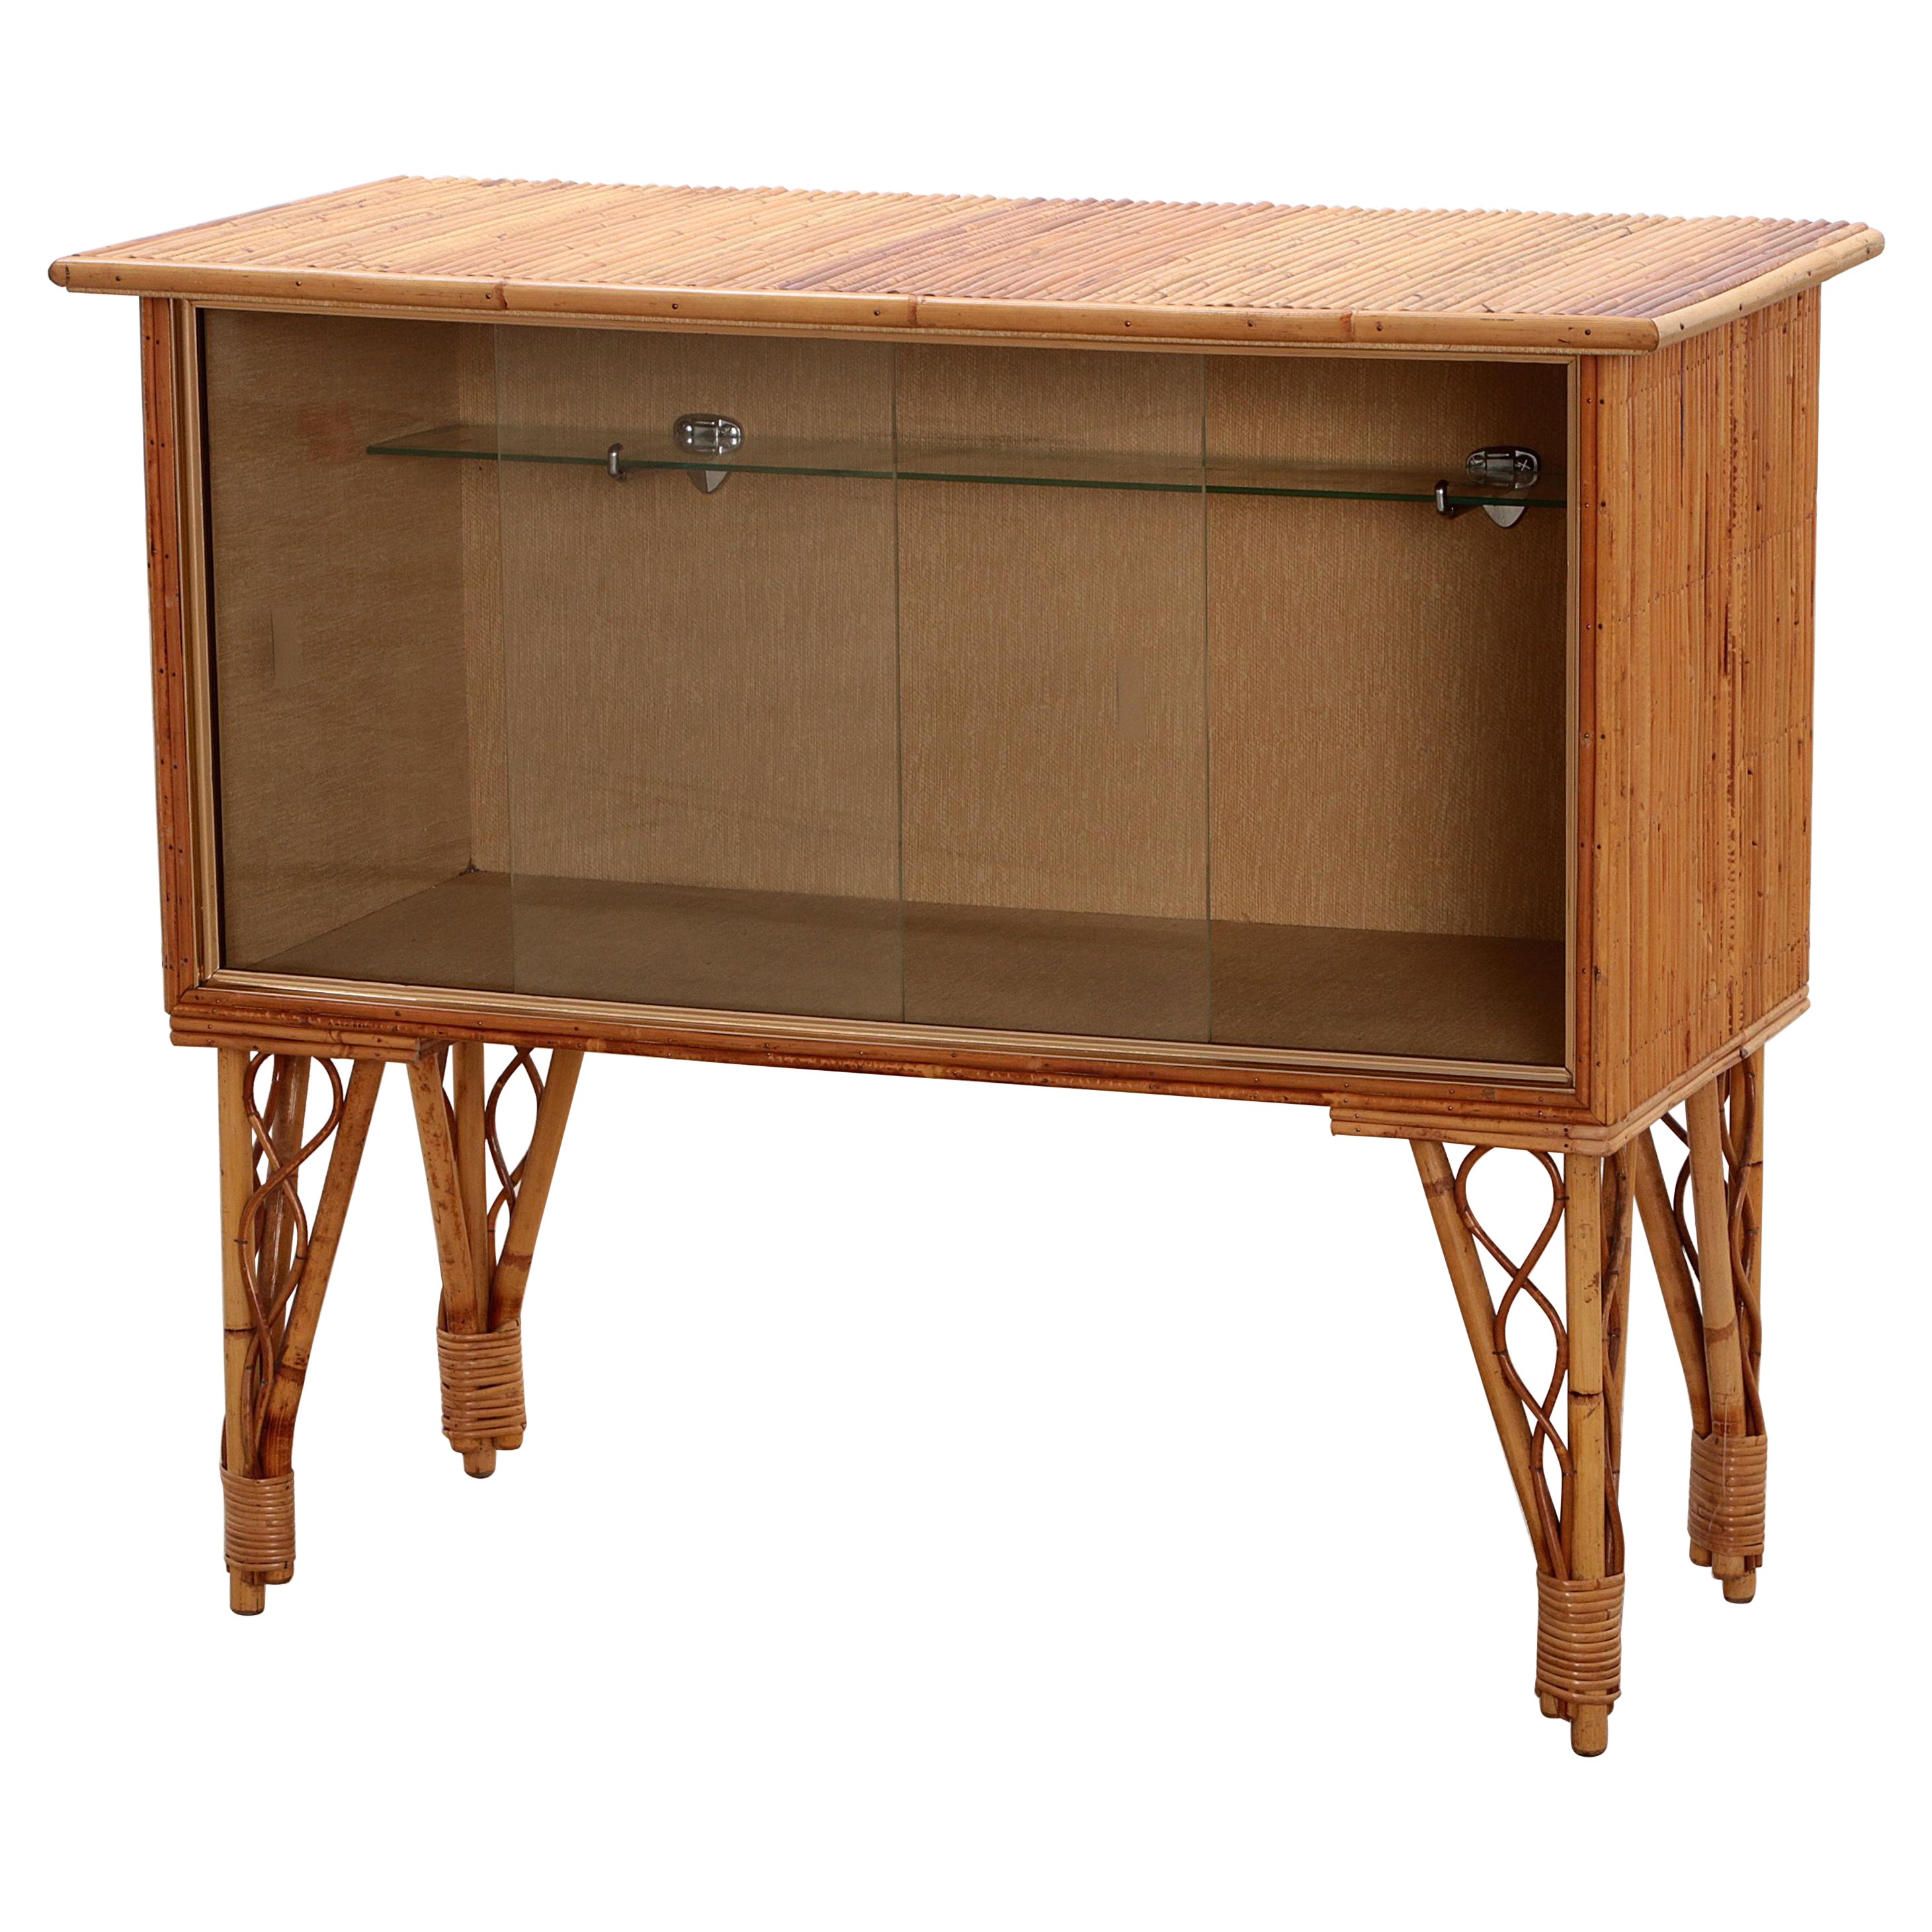 Vintage French Bamboo bar or display cabinet 1960s.